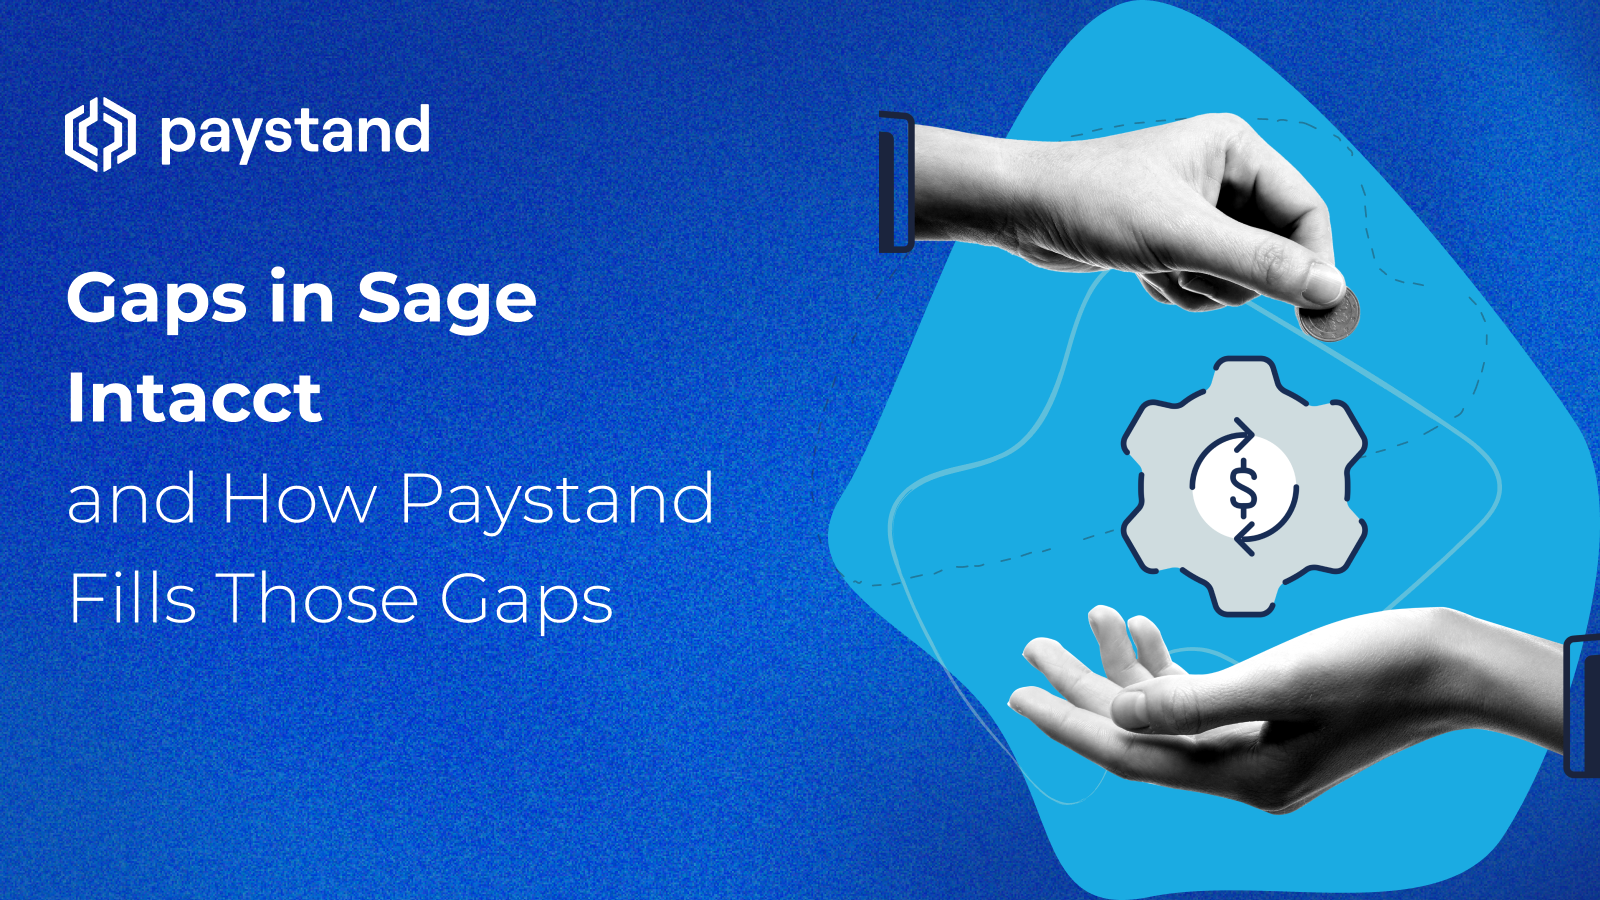 Gaps in Sage Intacct and How Paystand Fills Those Gaps